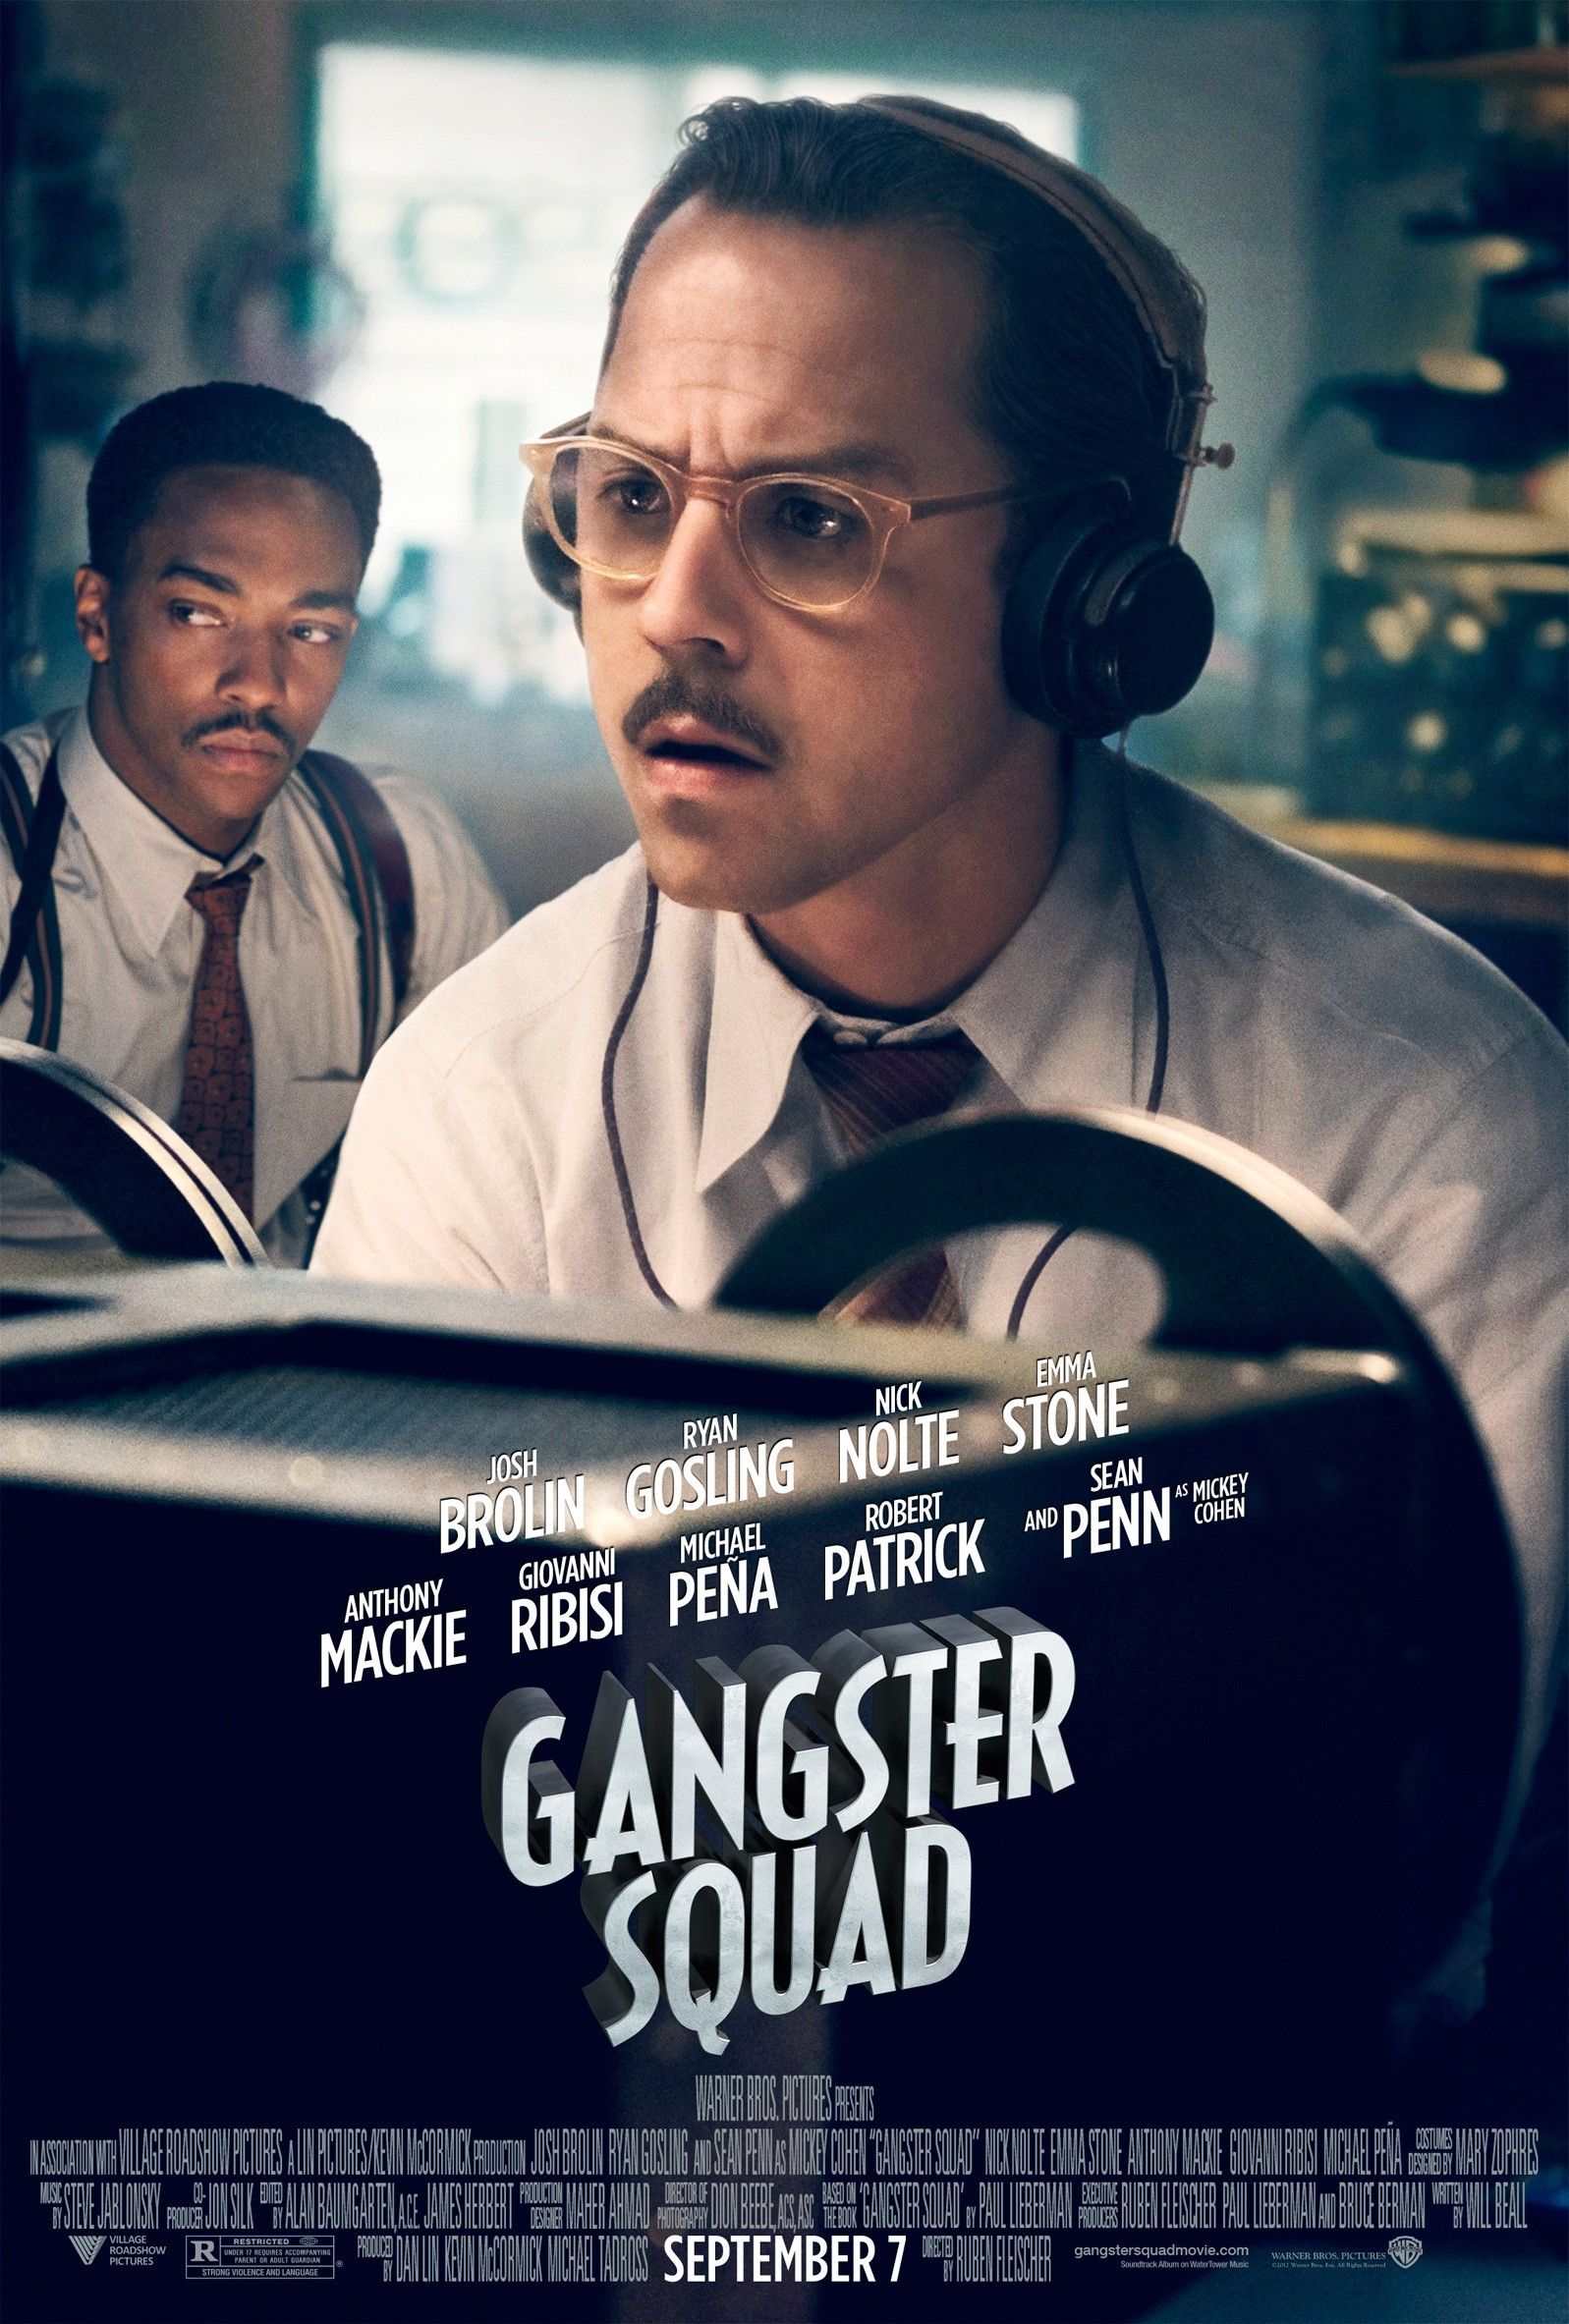 Gangster Squad Giovanni Ribisi Character Poster